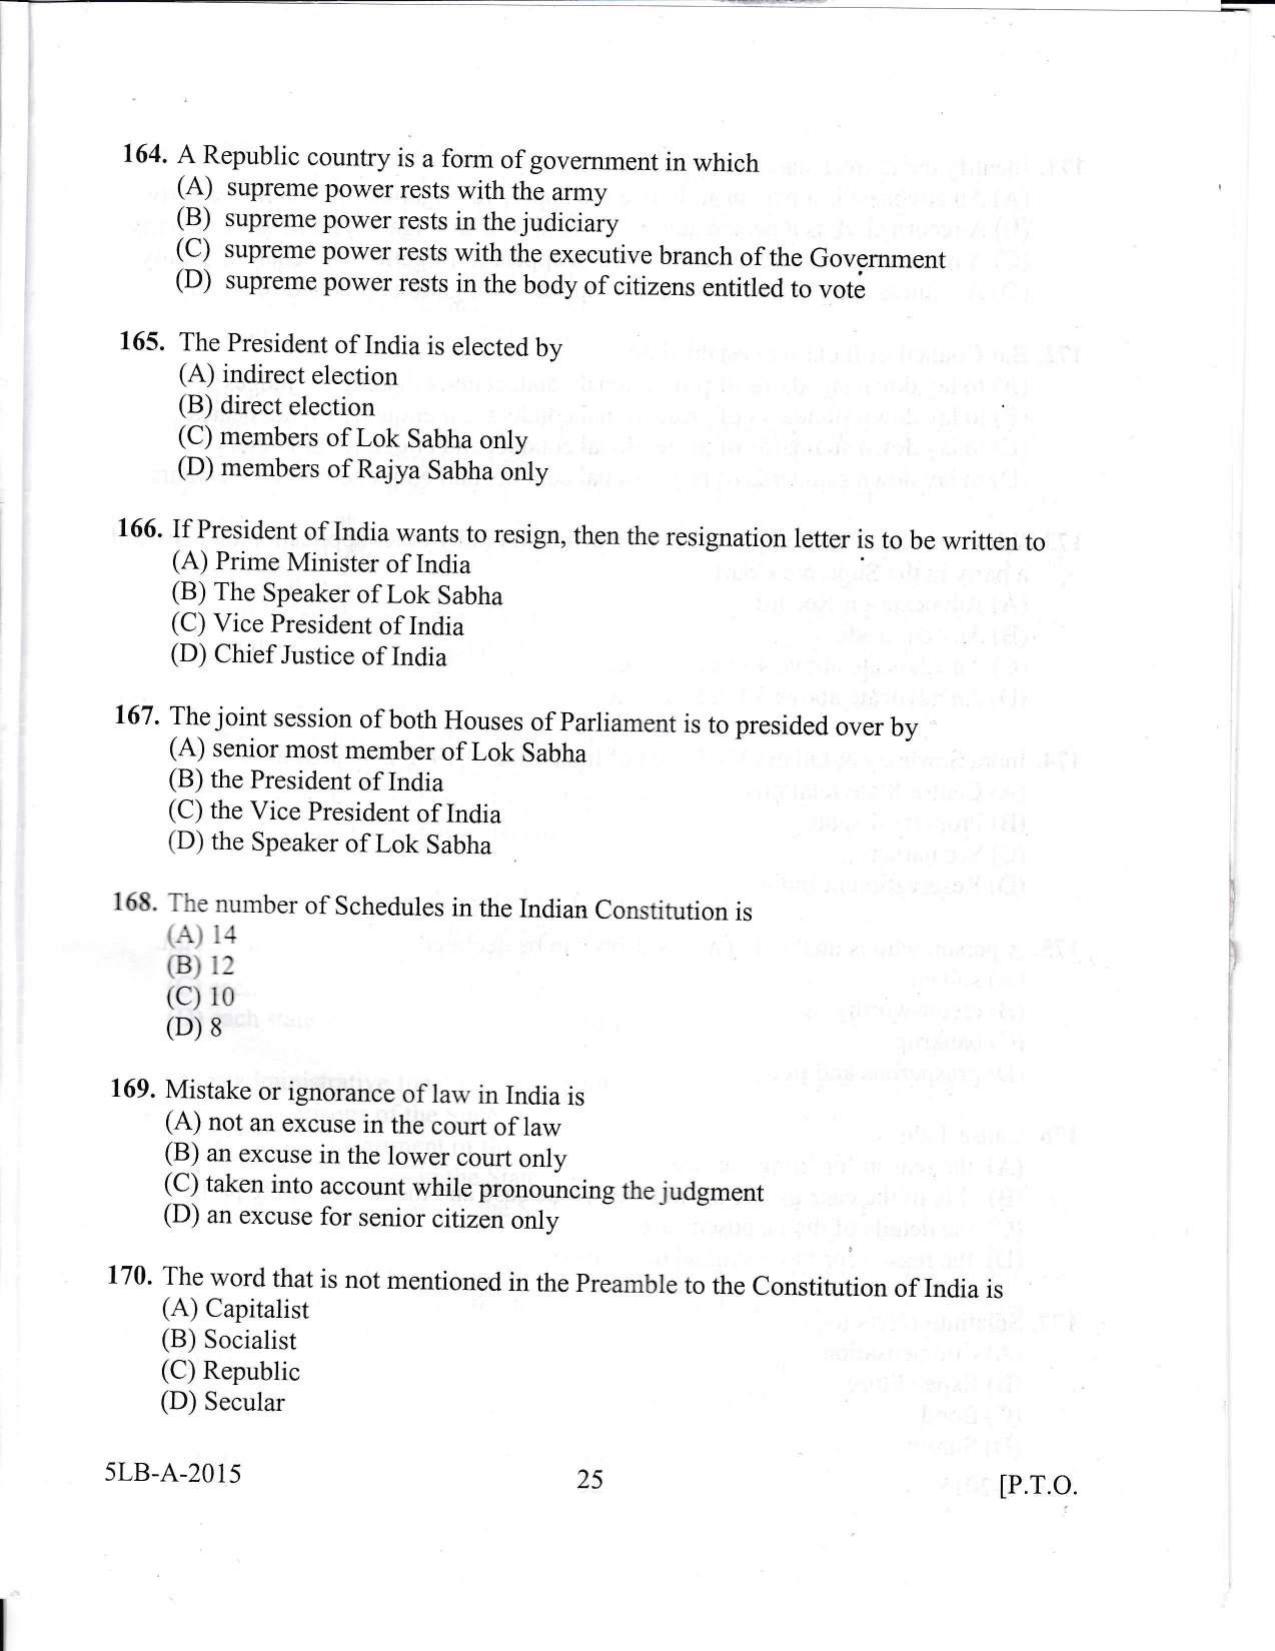 KLEE 5 Year LLB Exam 2015 Question Paper - Page 25